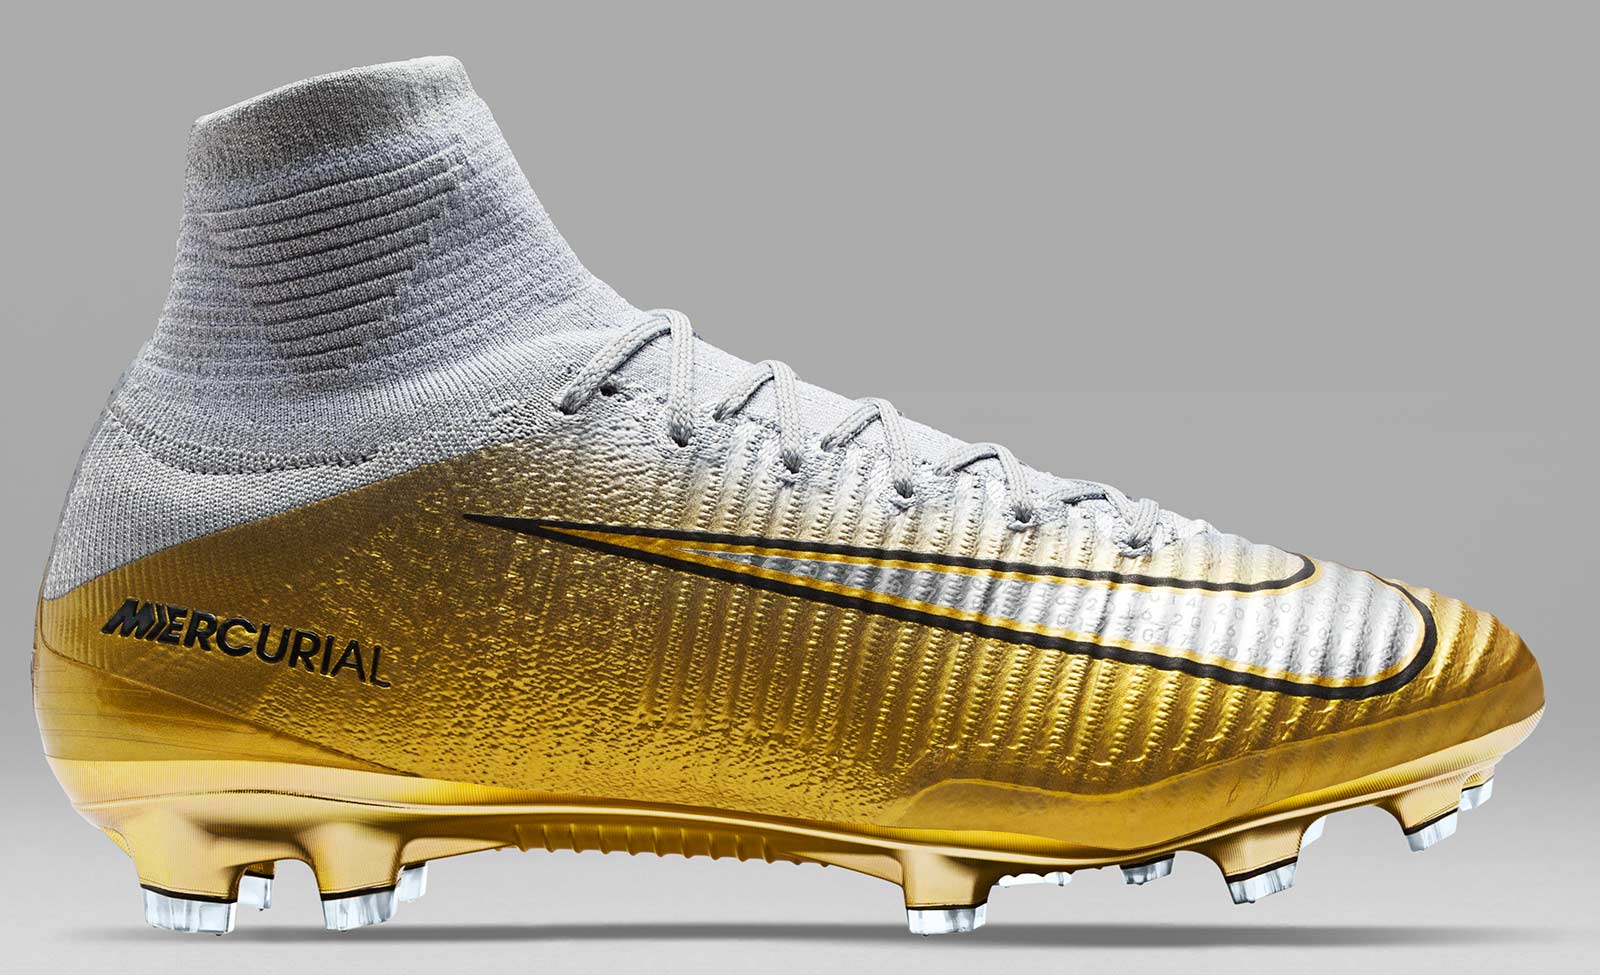 Acercarse vergüenza Falange Spectacular Nike Mercurial Superfly Cristiano Ronaldo 'Quinto Triunfo' 2017  Ballon d'Or Boots Released - Footy Headlines